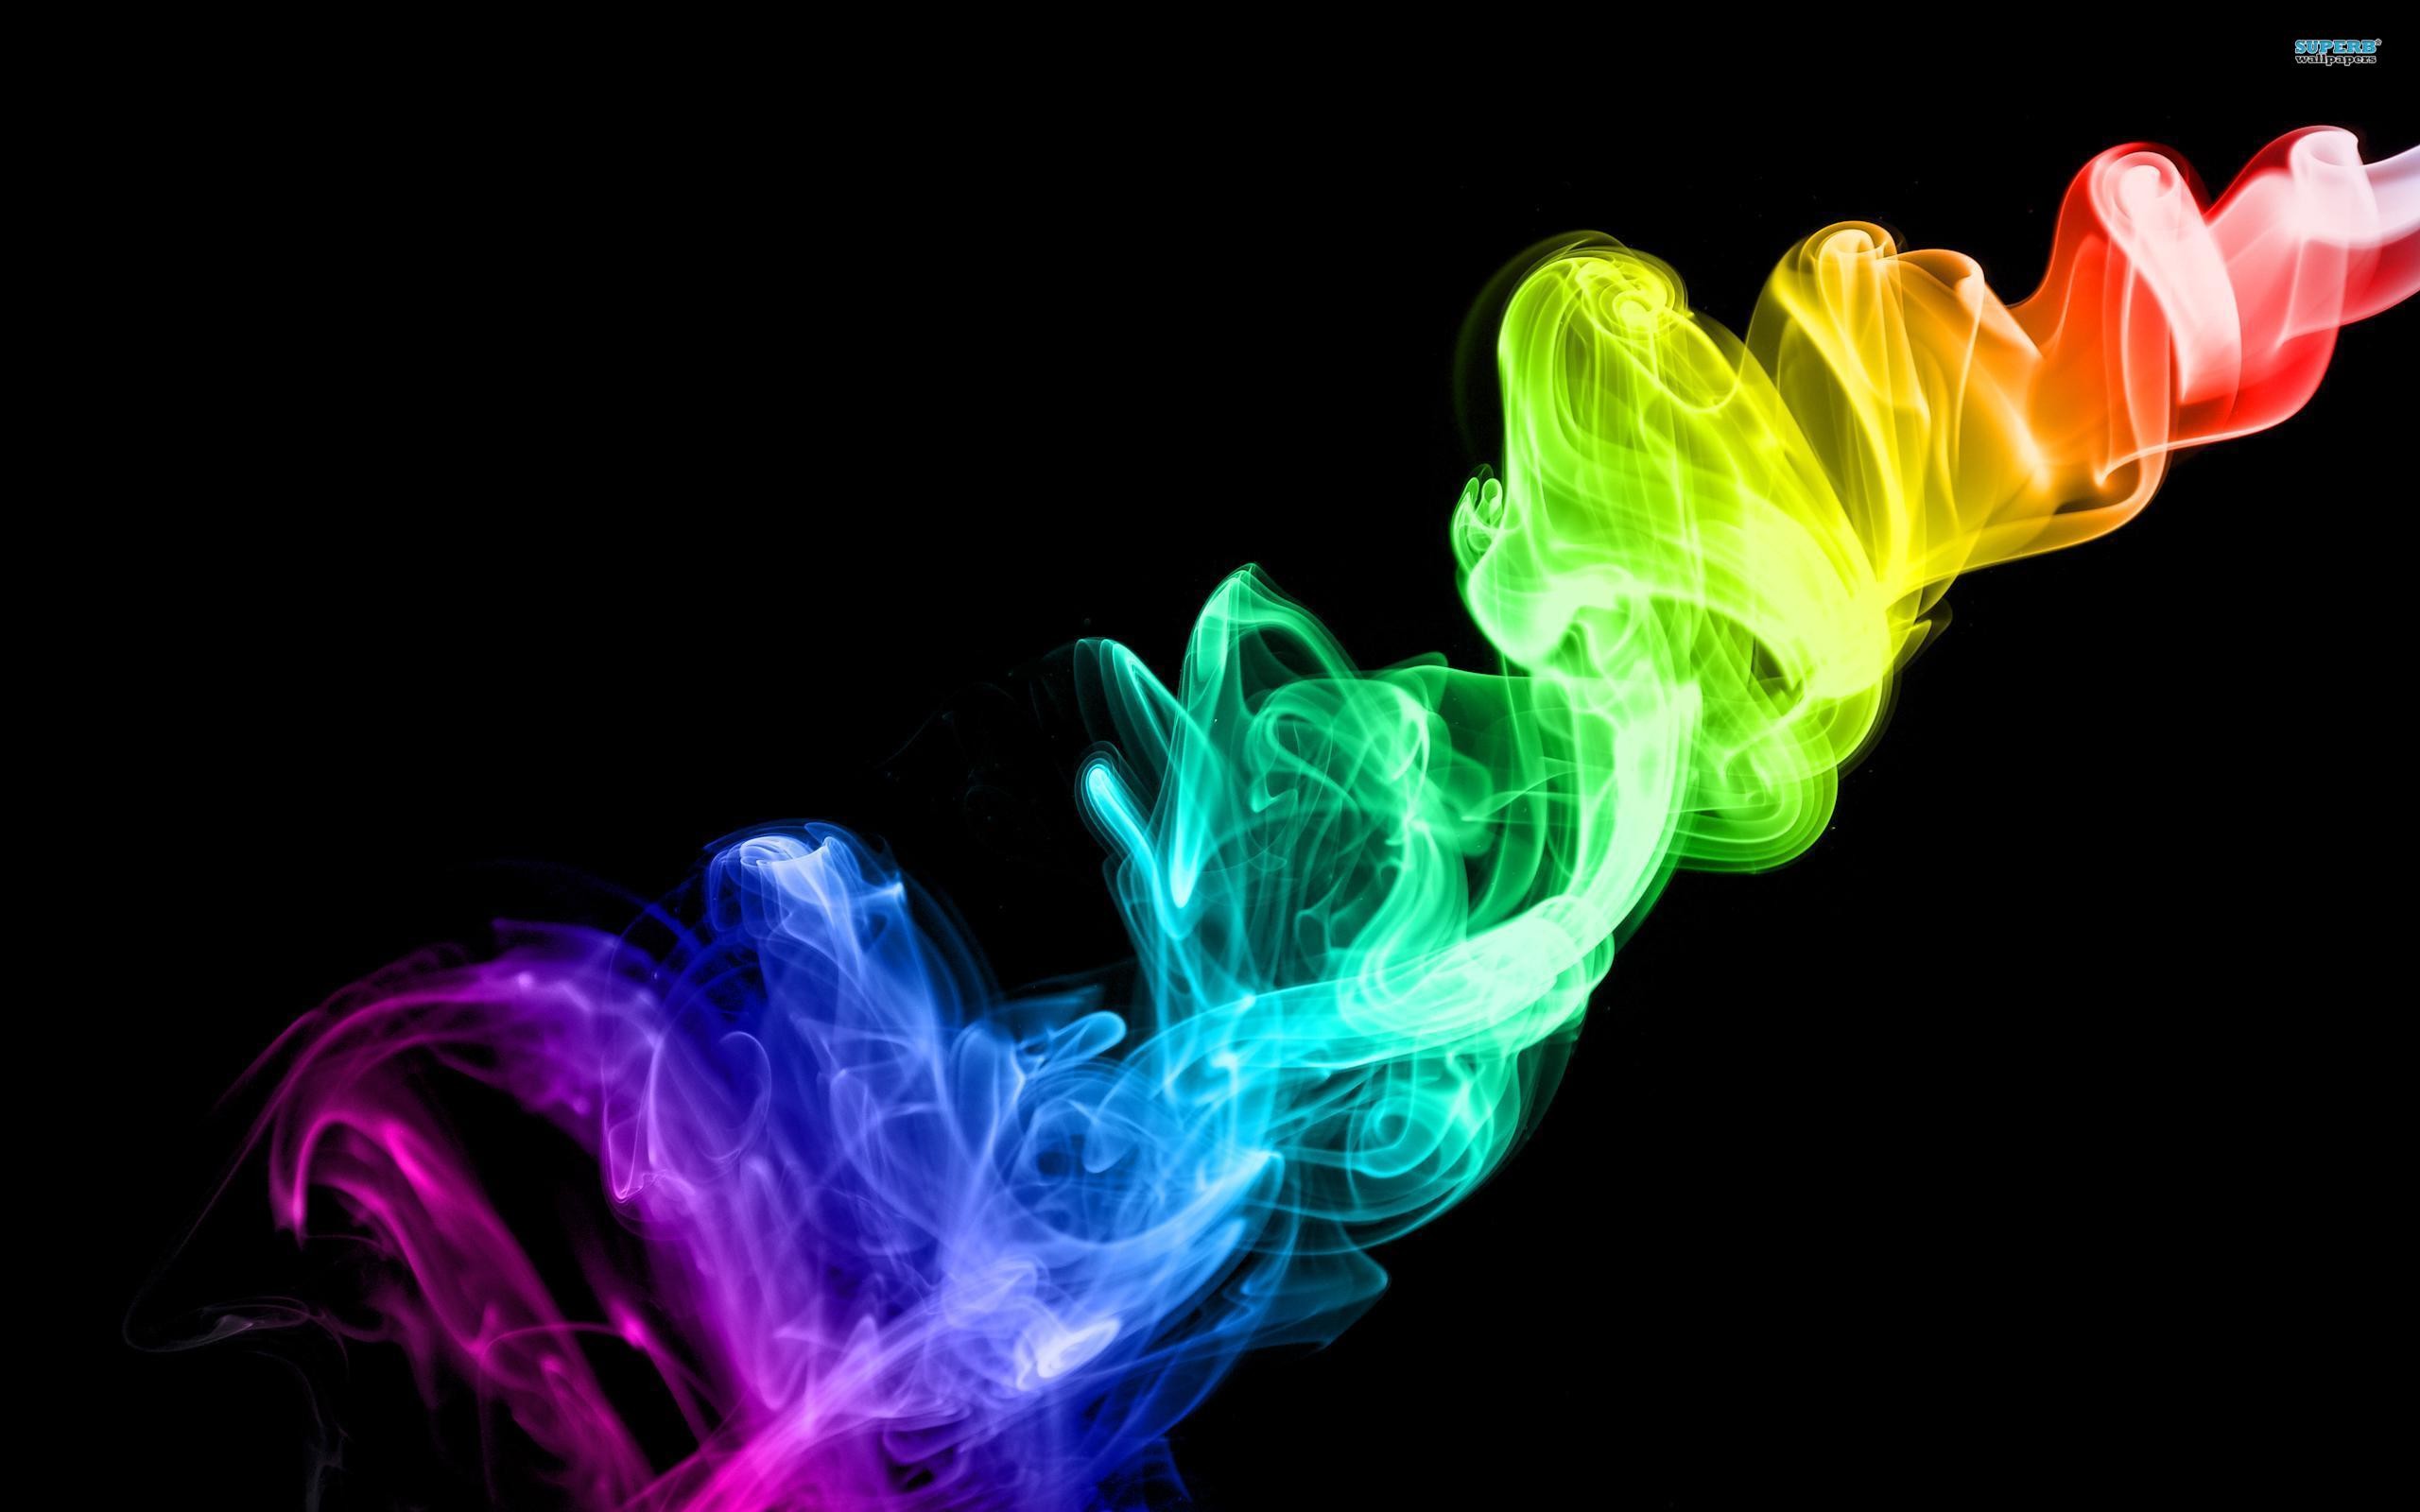 2560x1600 Colorful smoke wallpaper - Abstract wallpapers - #